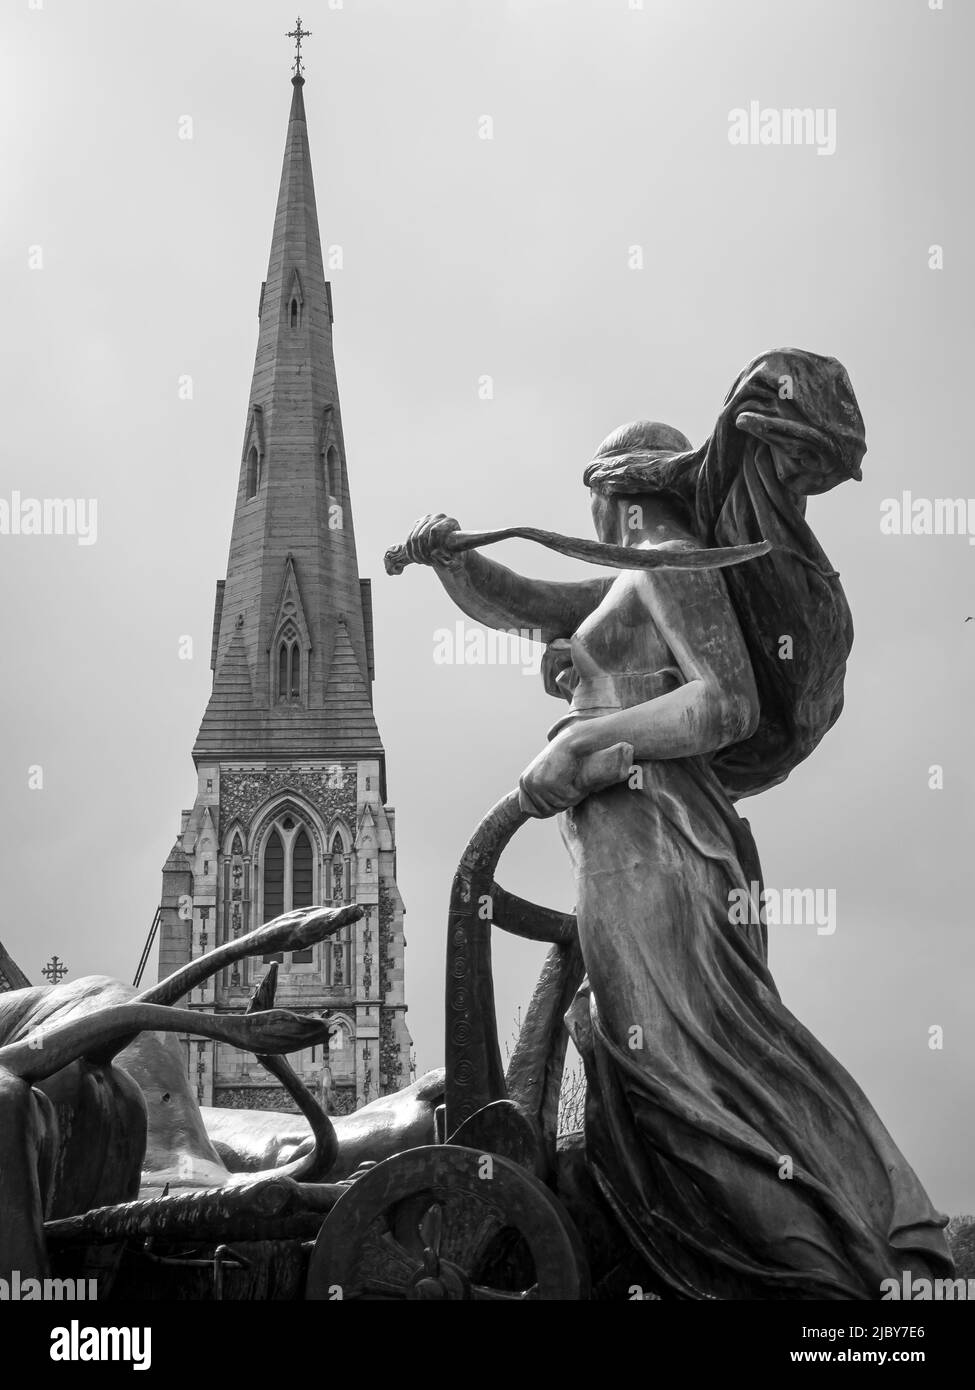 Statue in fountain across from steeple Stock Photo